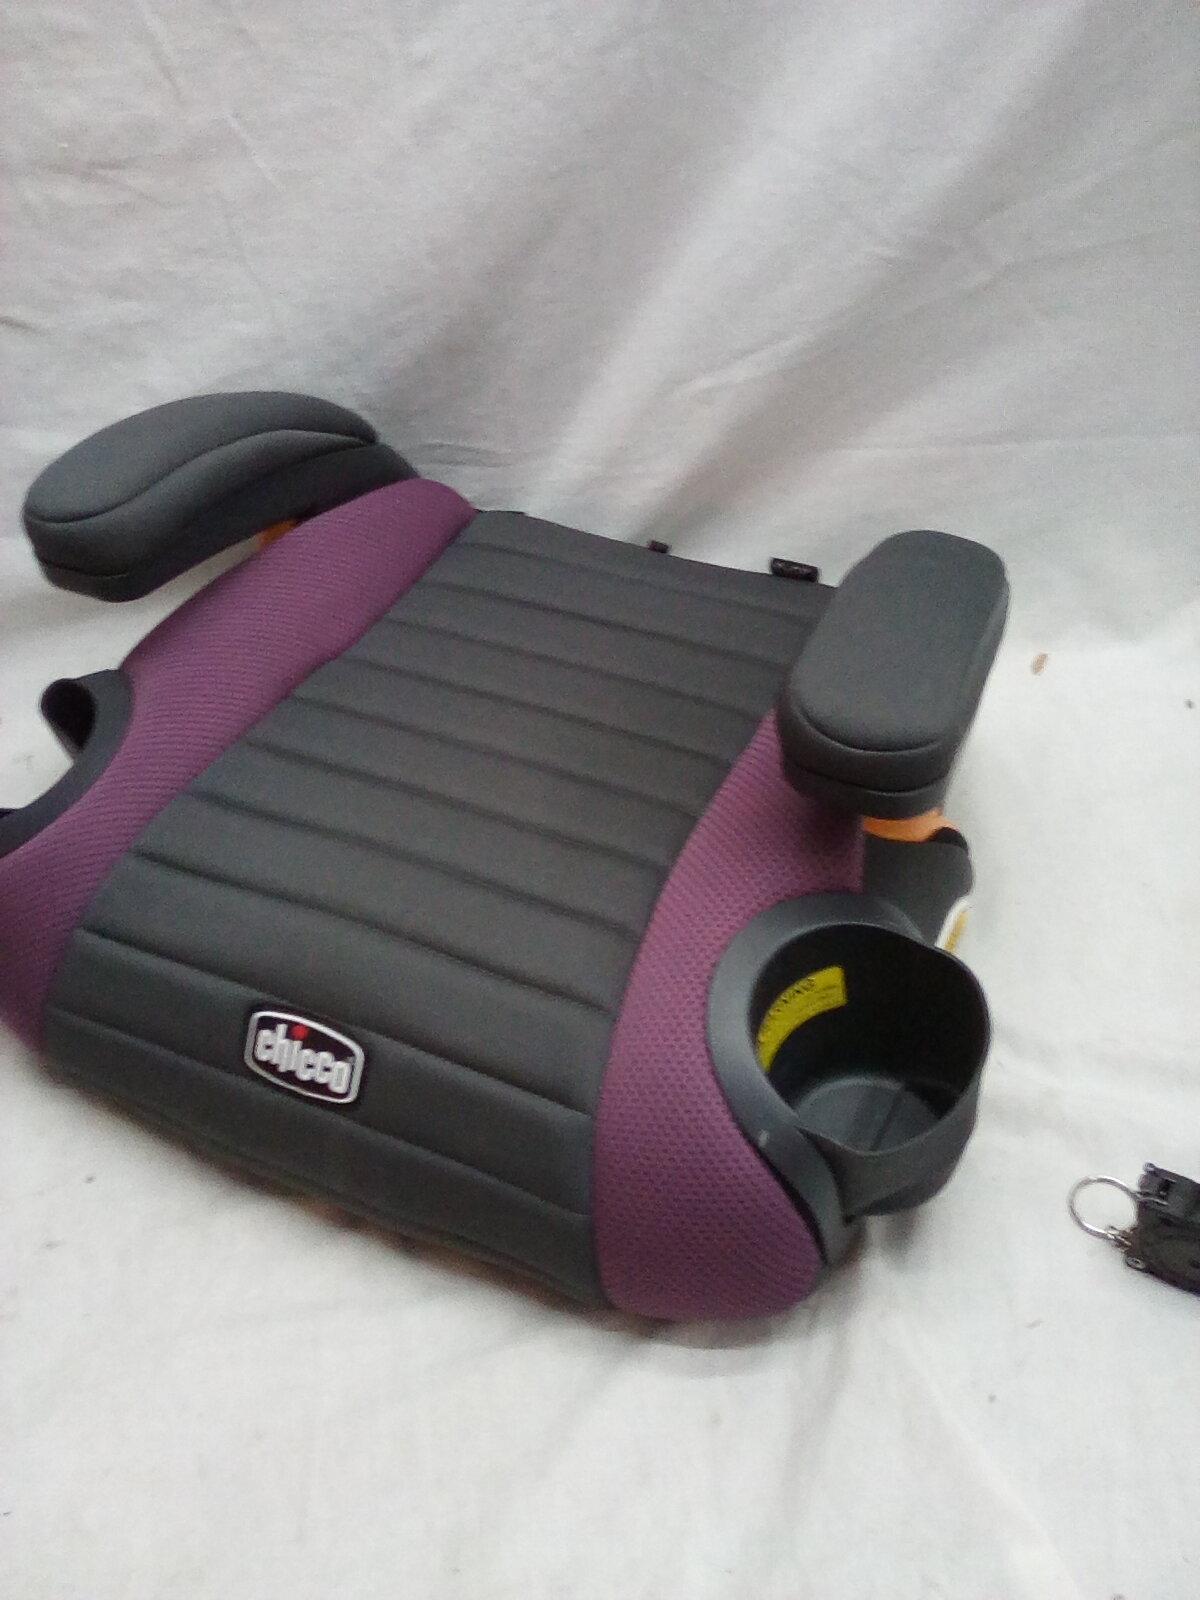 Chicco Child’s Car booster Seat